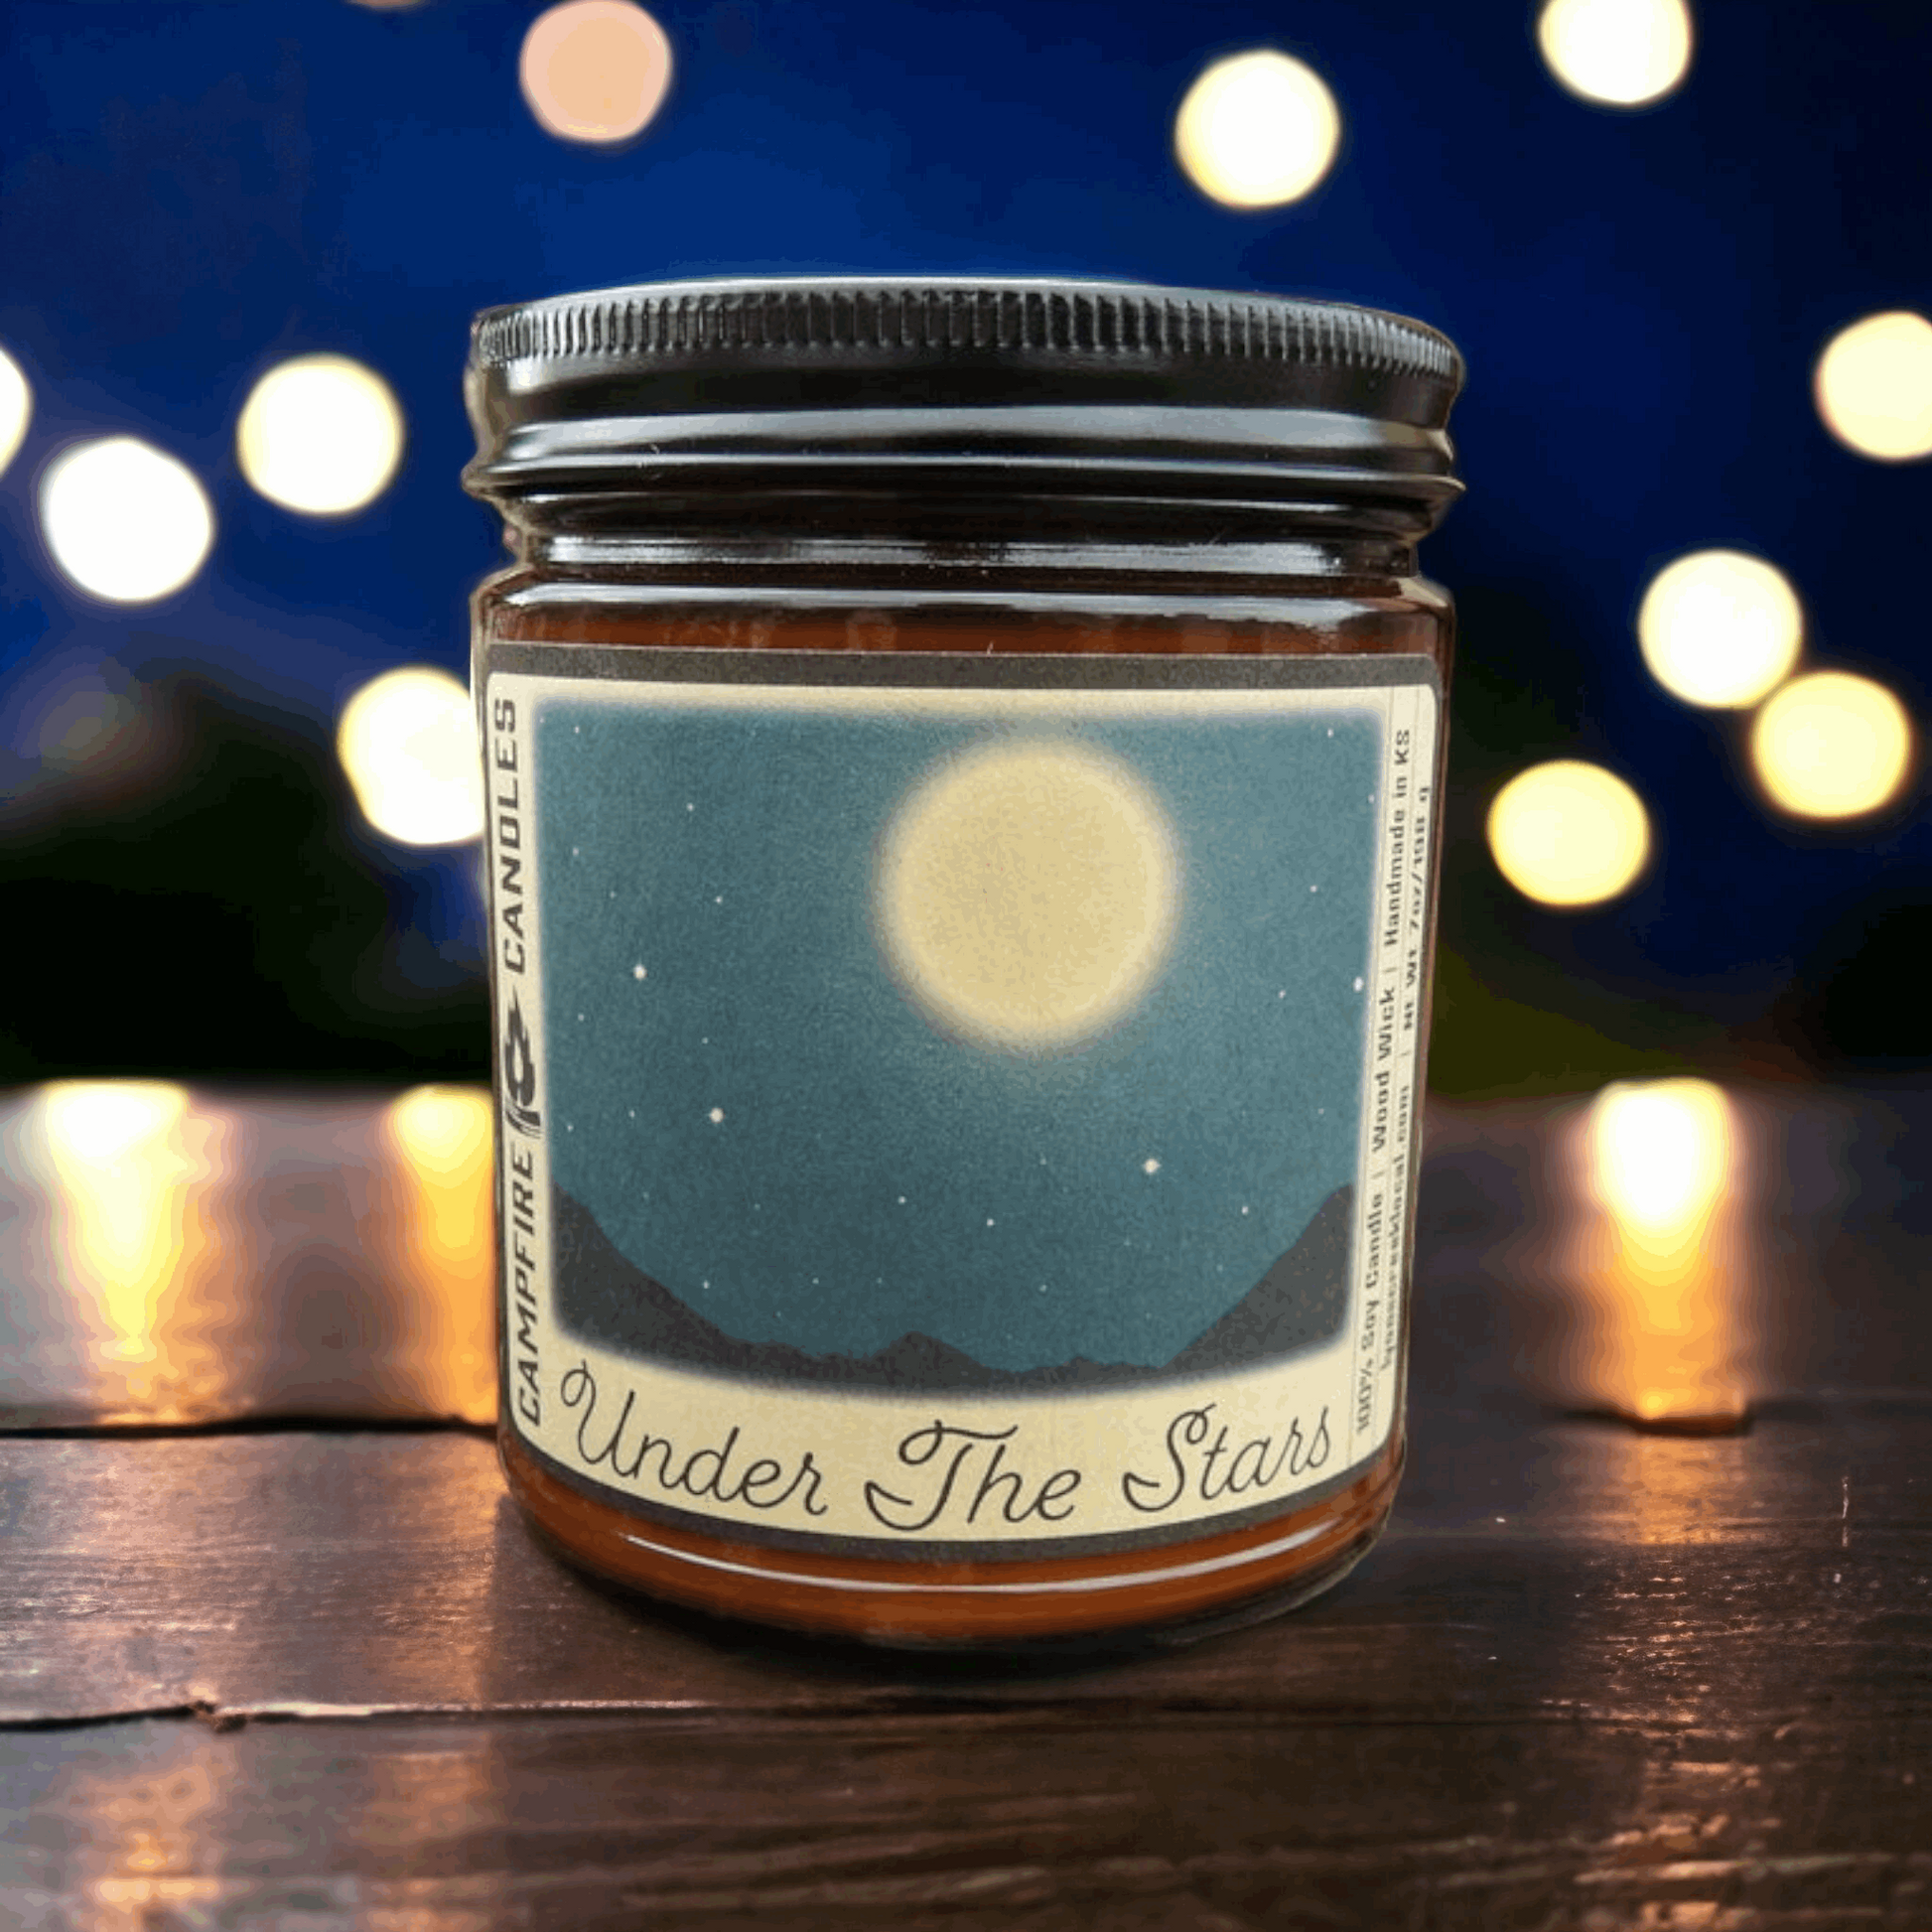 Under the Stars - Soy Wax Candle - Wood Wick - Campfire Candles